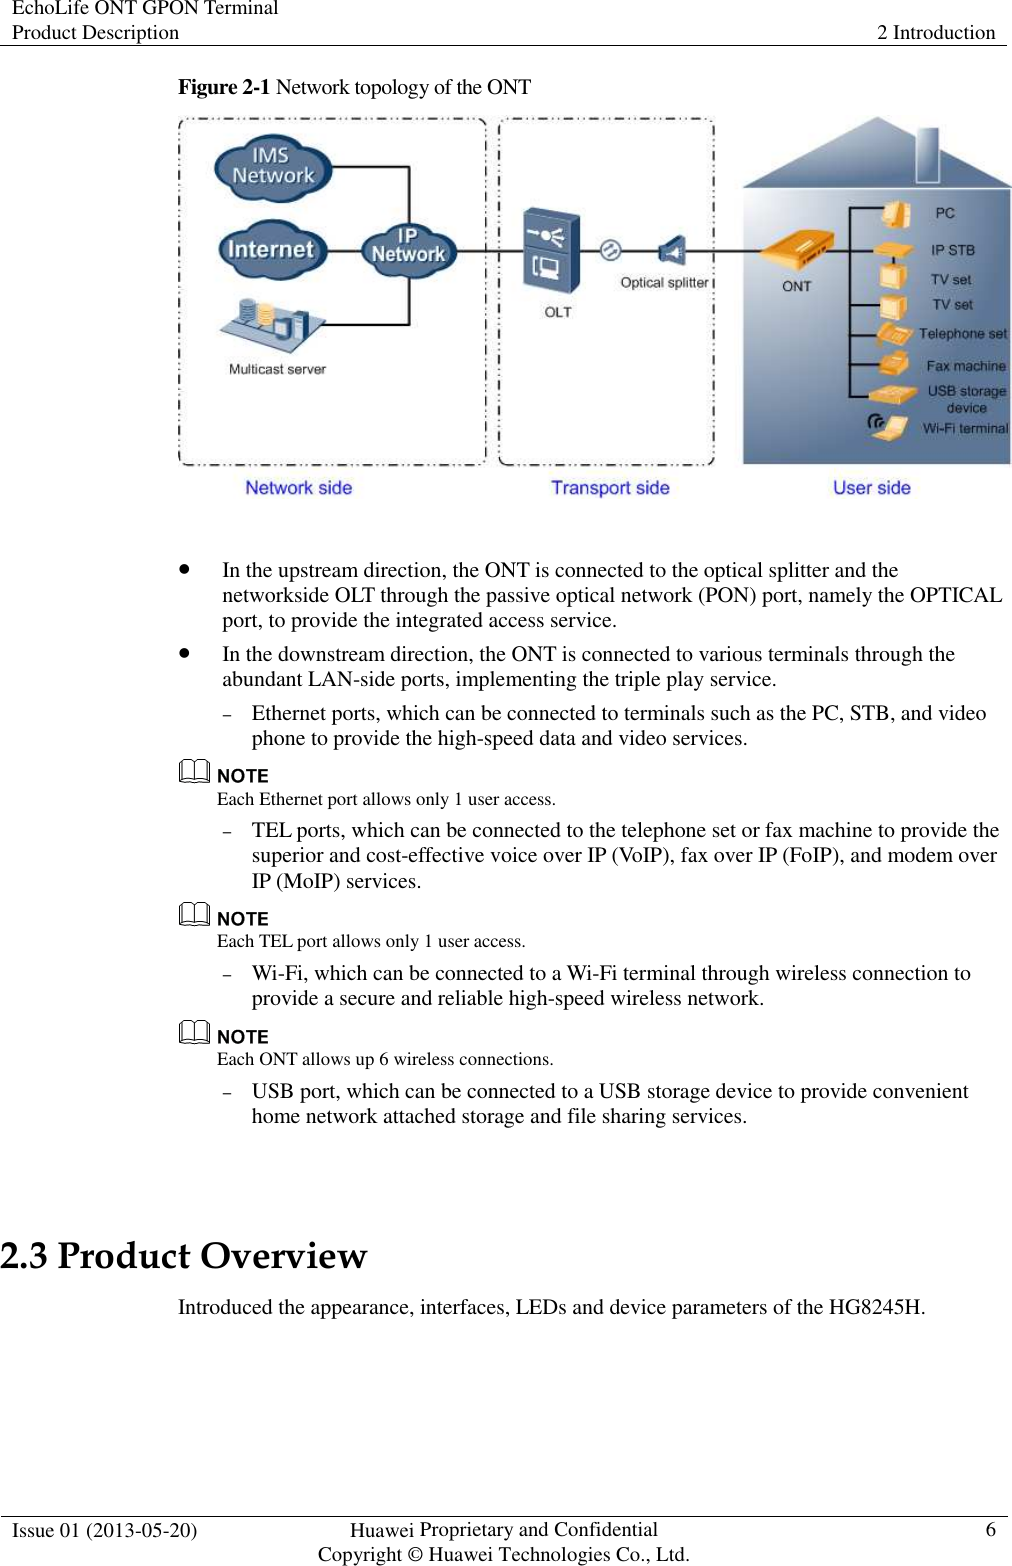 EchoLife ONT GPON Terminal Product Description  2 Introduction  Issue 01 (2013-05-20)  Huawei Proprietary and Confidential                                     Copyright © Huawei Technologies Co., Ltd. 6  Figure 2-1 Network topology of the ONT    In the upstream direction, the ONT is connected to the optical splitter and the networkside OLT through the passive optical network (PON) port, namely the OPTICAL port, to provide the integrated access service.  In the downstream direction, the ONT is connected to various terminals through the abundant LAN-side ports, implementing the triple play service. − Ethernet ports, which can be connected to terminals such as the PC, STB, and video phone to provide the high-speed data and video services.  Each Ethernet port allows only 1 user access. − TEL ports, which can be connected to the telephone set or fax machine to provide the superior and cost-effective voice over IP (VoIP), fax over IP (FoIP), and modem over IP (MoIP) services.  Each TEL port allows only 1 user access. − Wi-Fi, which can be connected to a Wi-Fi terminal through wireless connection to provide a secure and reliable high-speed wireless network.  Each ONT allows up 6 wireless connections. − USB port, which can be connected to a USB storage device to provide convenient home network attached storage and file sharing services.  2.3 Product Overview Introduced the appearance, interfaces, LEDs and device parameters of the HG8245H. 